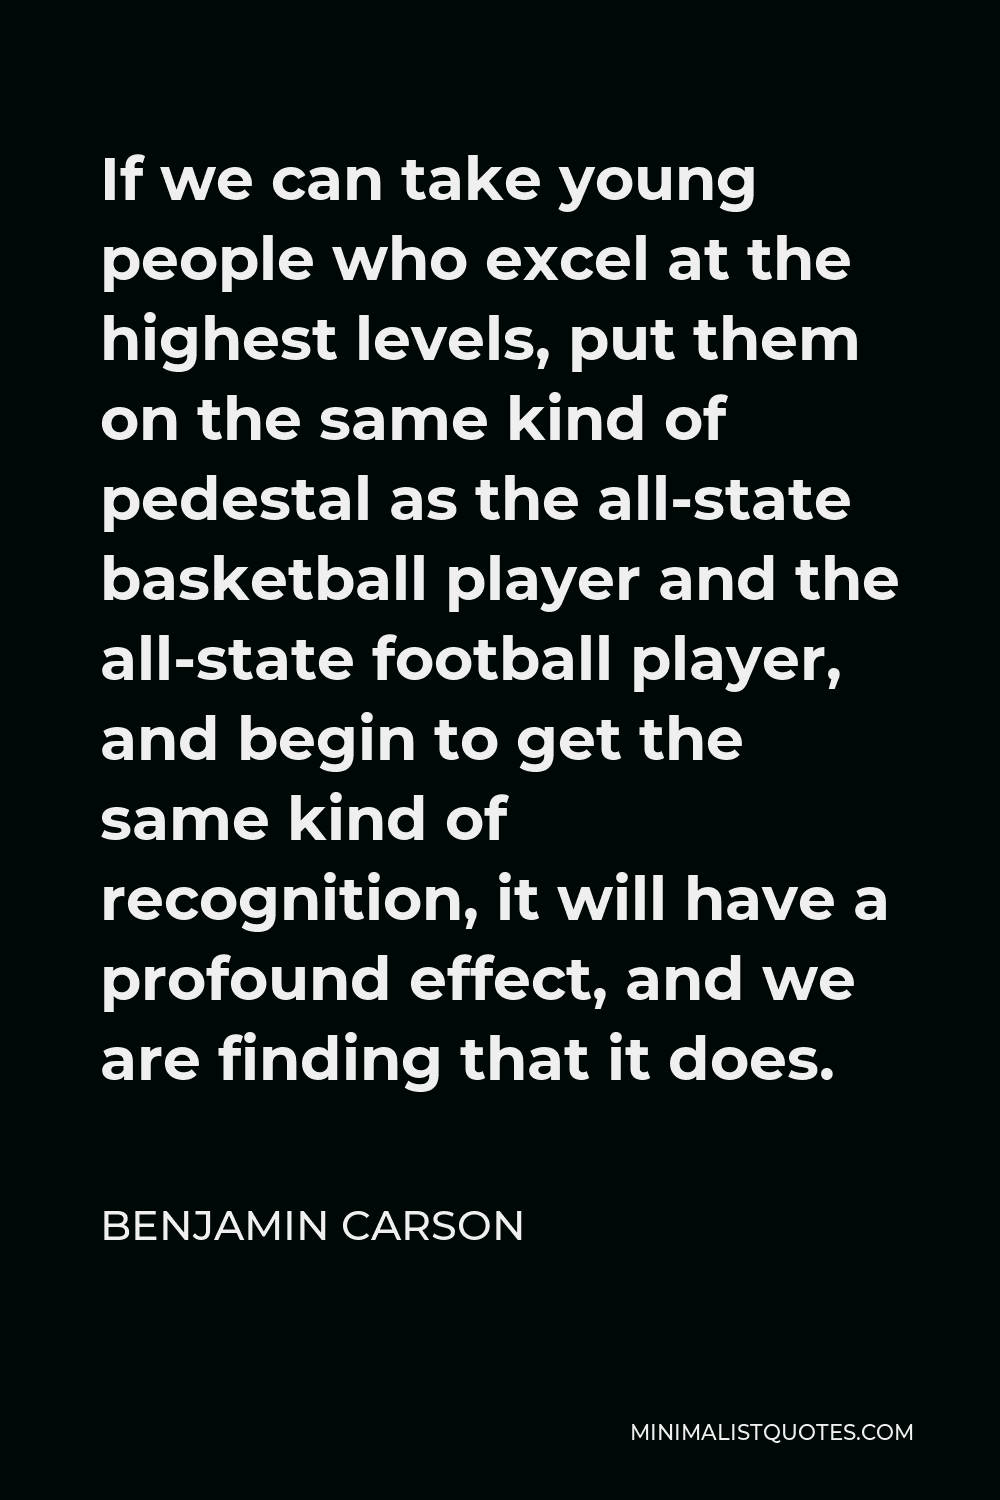 Benjamin Carson Quote - If we can take young people who excel at the highest levels, put them on the same kind of pedestal as the all-state basketball player and the all-state football player, and begin to get the same kind of recognition, it will have a profound effect, and we are finding that it does.